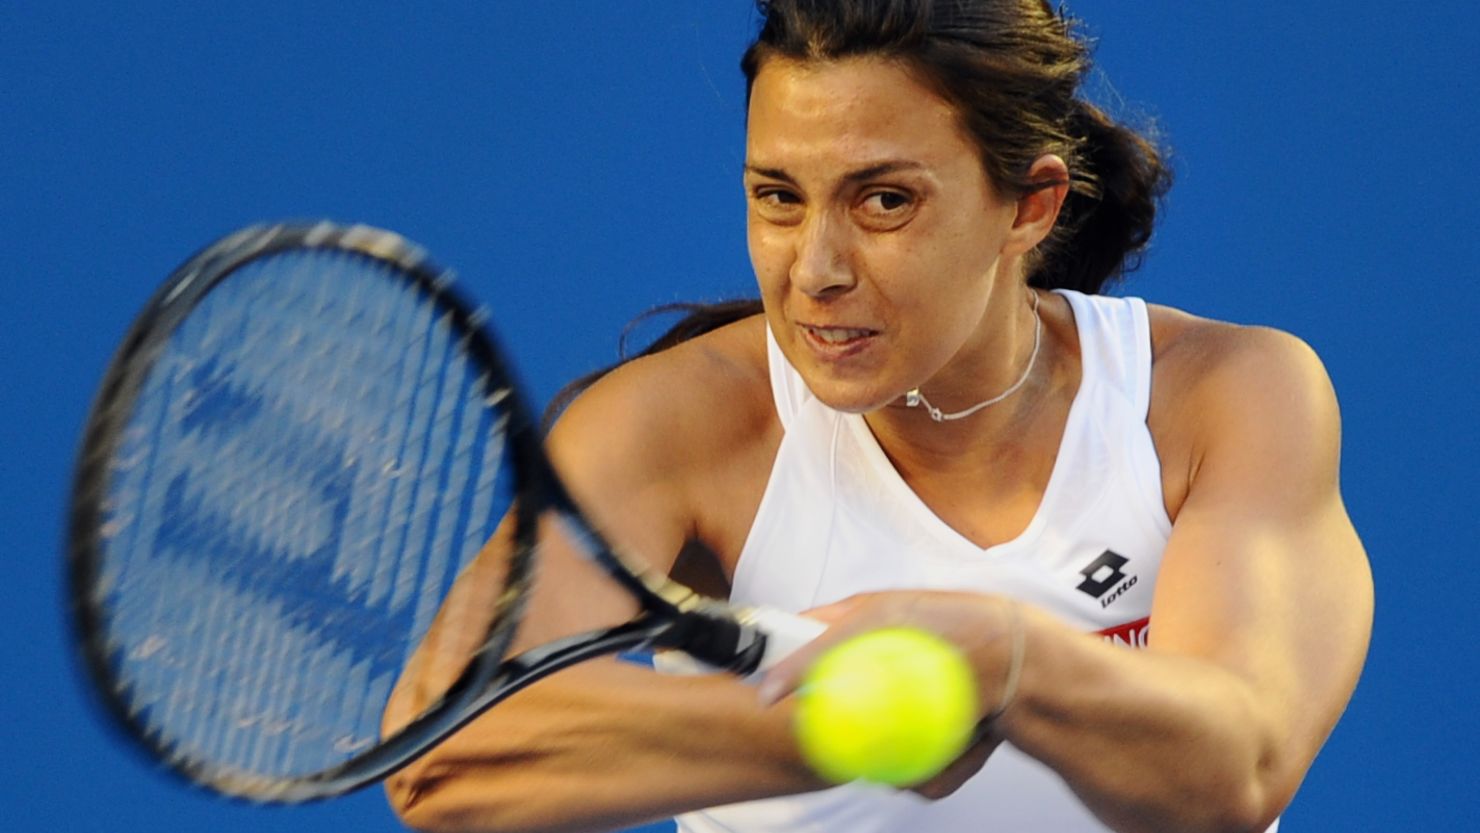 Marion Bartoli is the only French representative left in the Paris Open after she beat Bethanie Mattek-Sands.